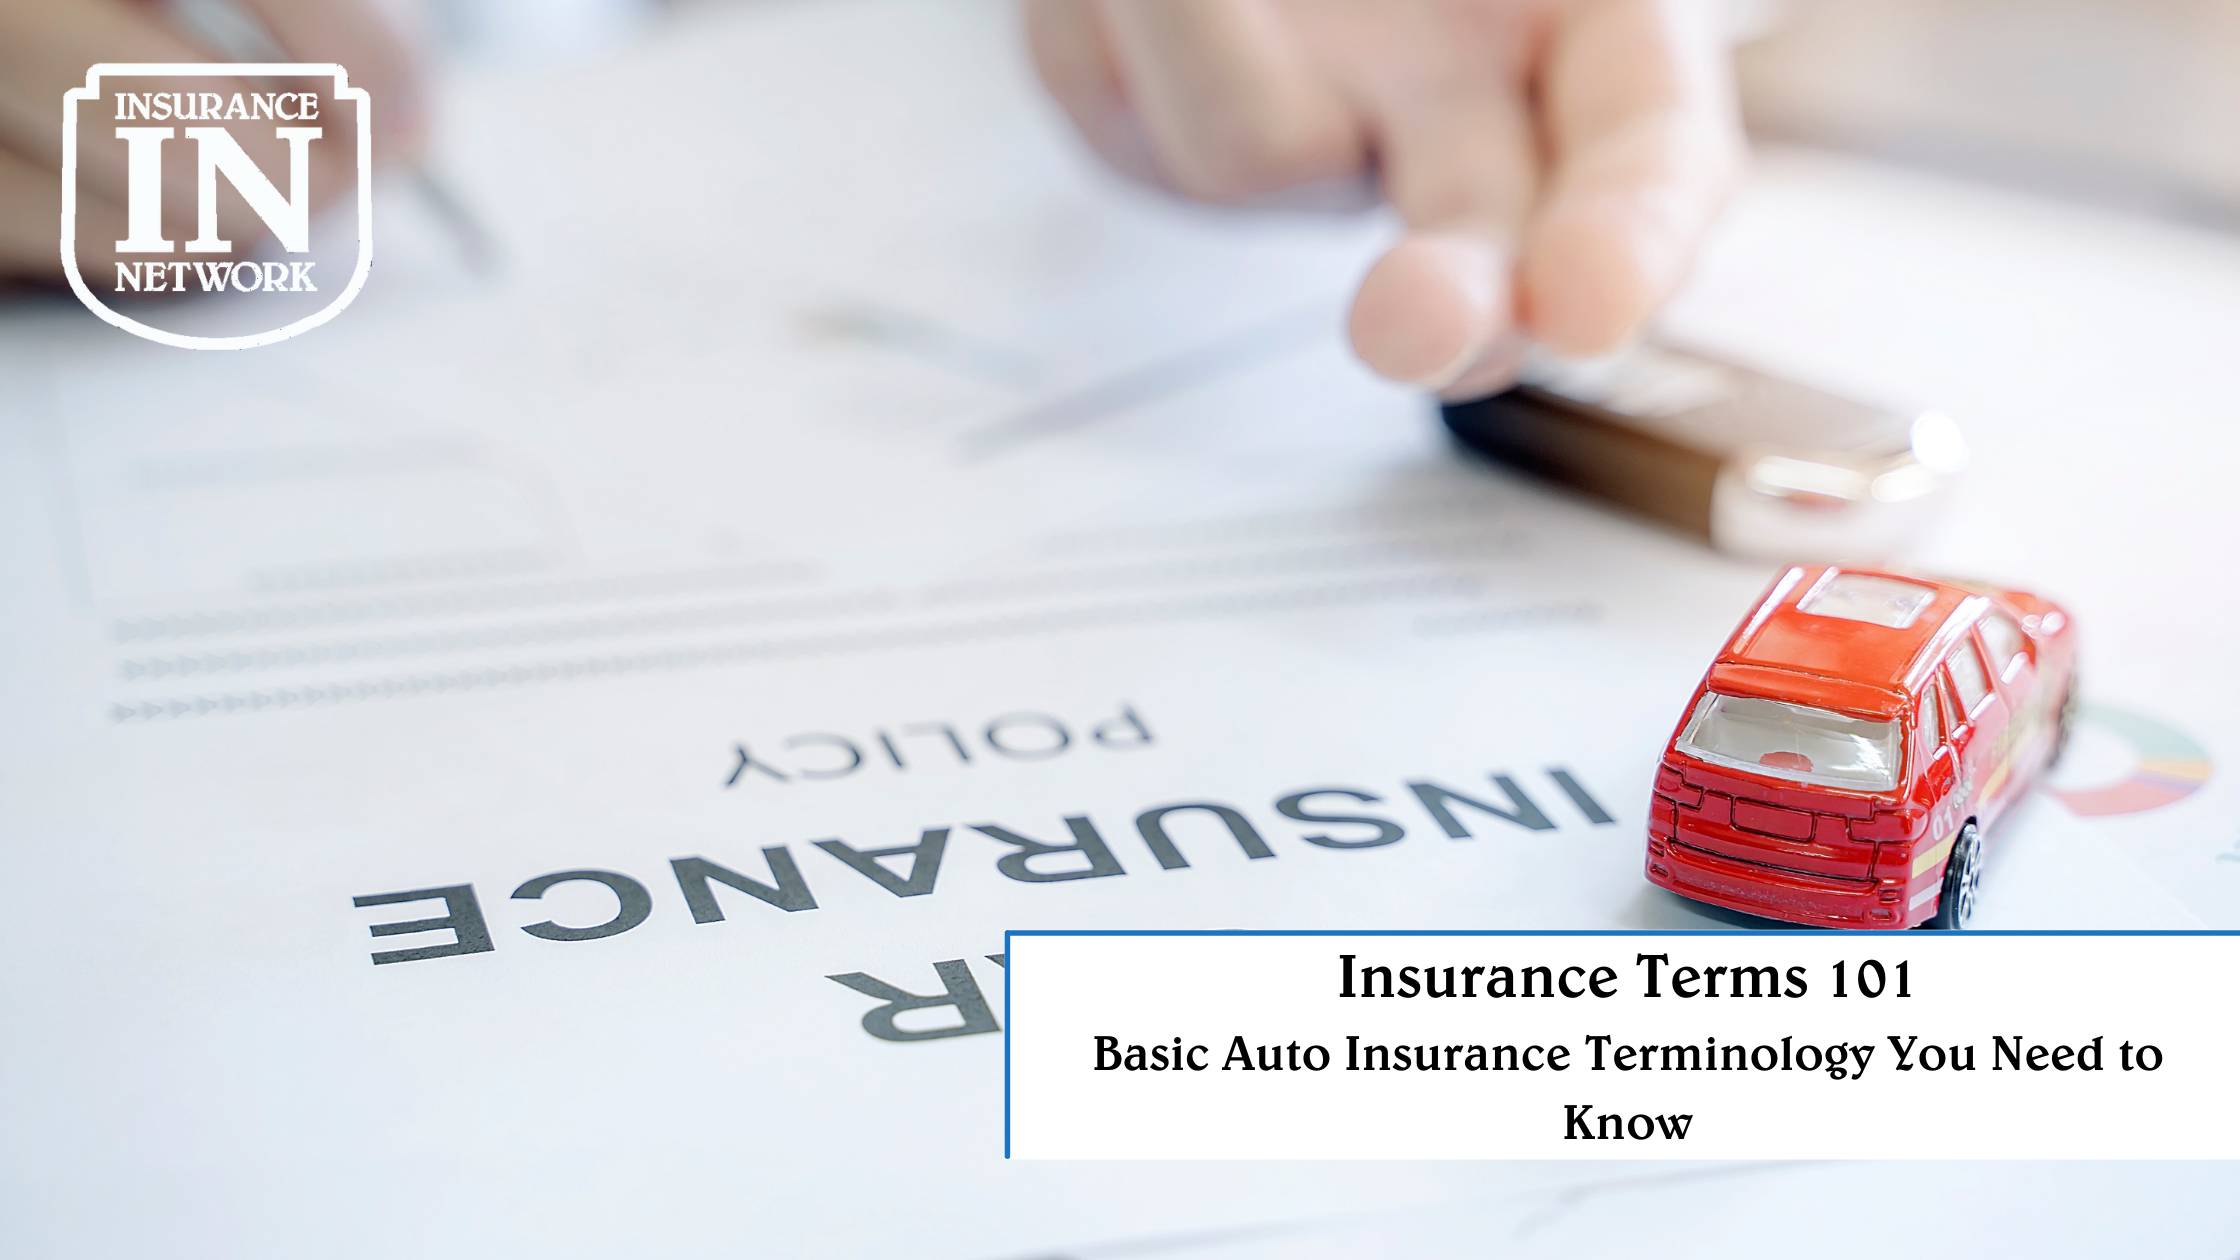 Insurance Terms 101: Basic Auto Insurance Terminology You Need to Know